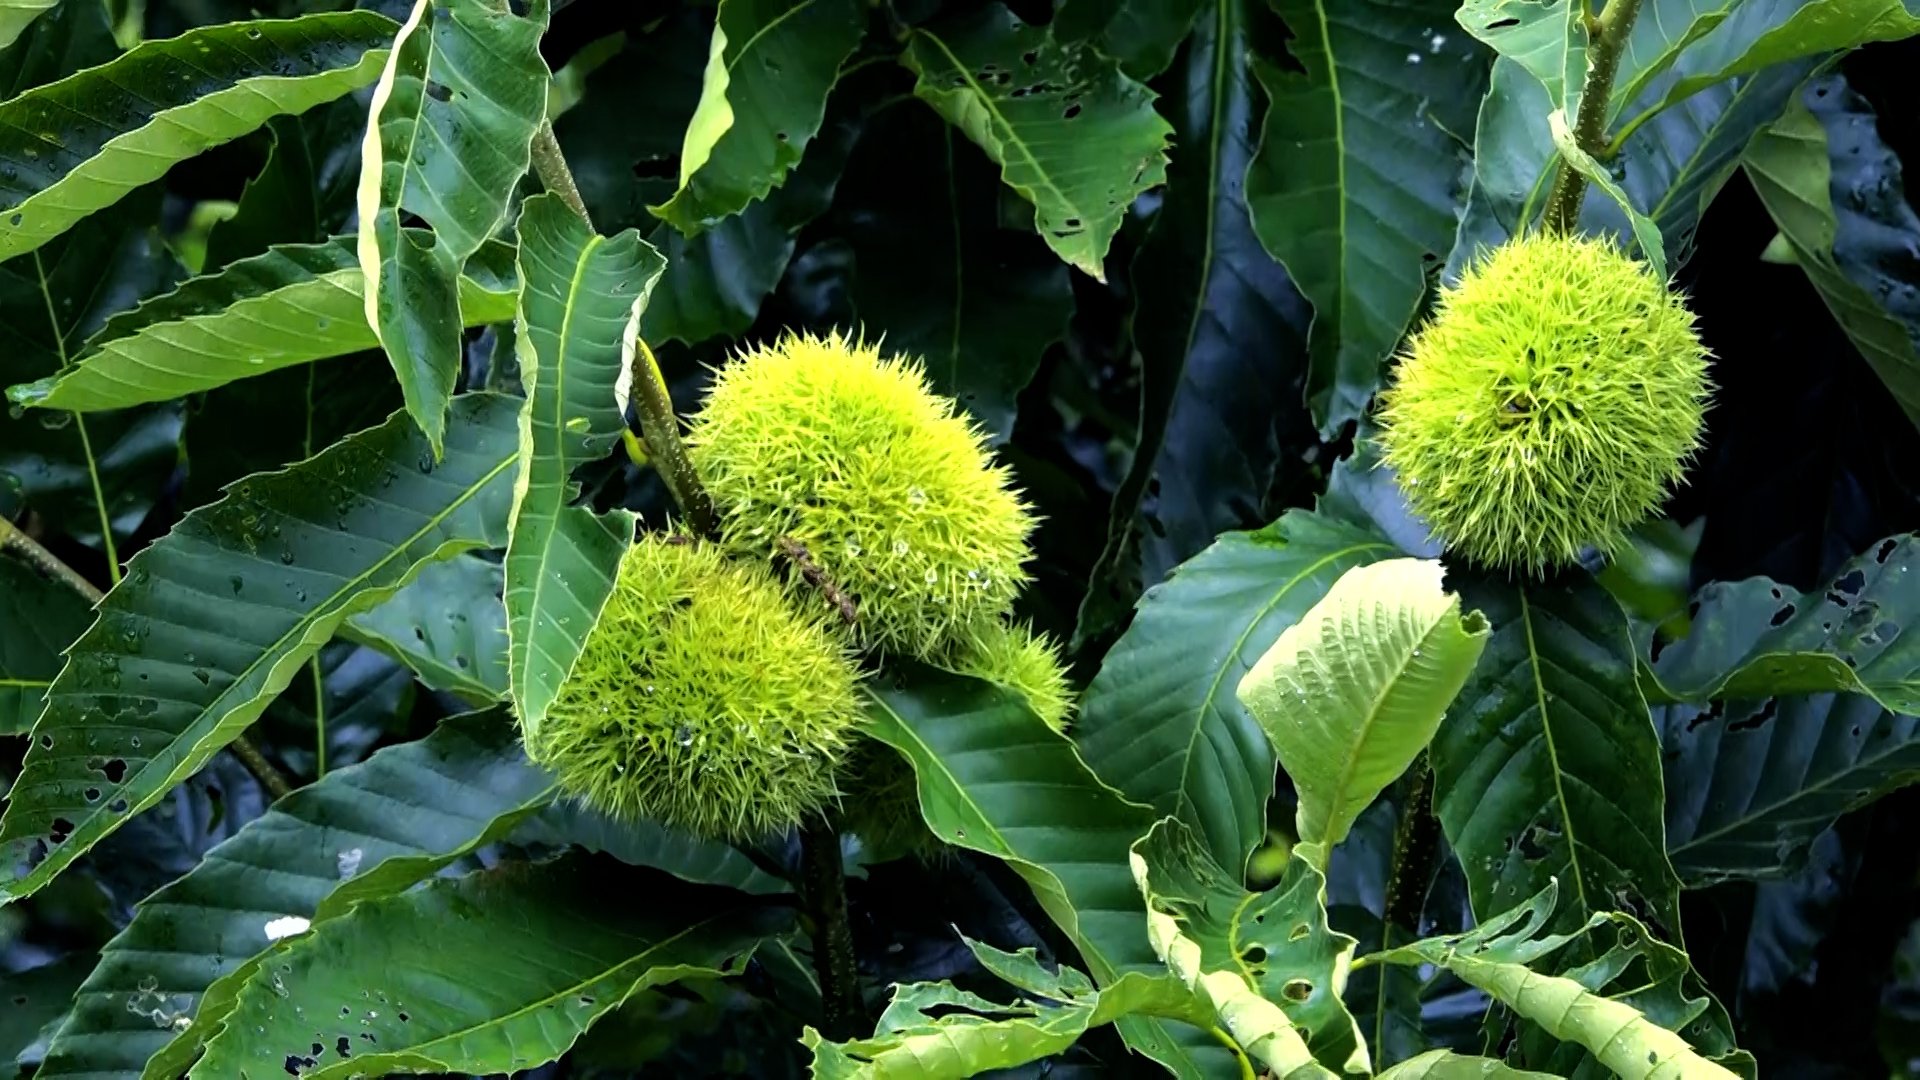 The chestnut tree has become a crop that brings high economic value to the people of Ngan Son district. Photo: Ngoc Tu.